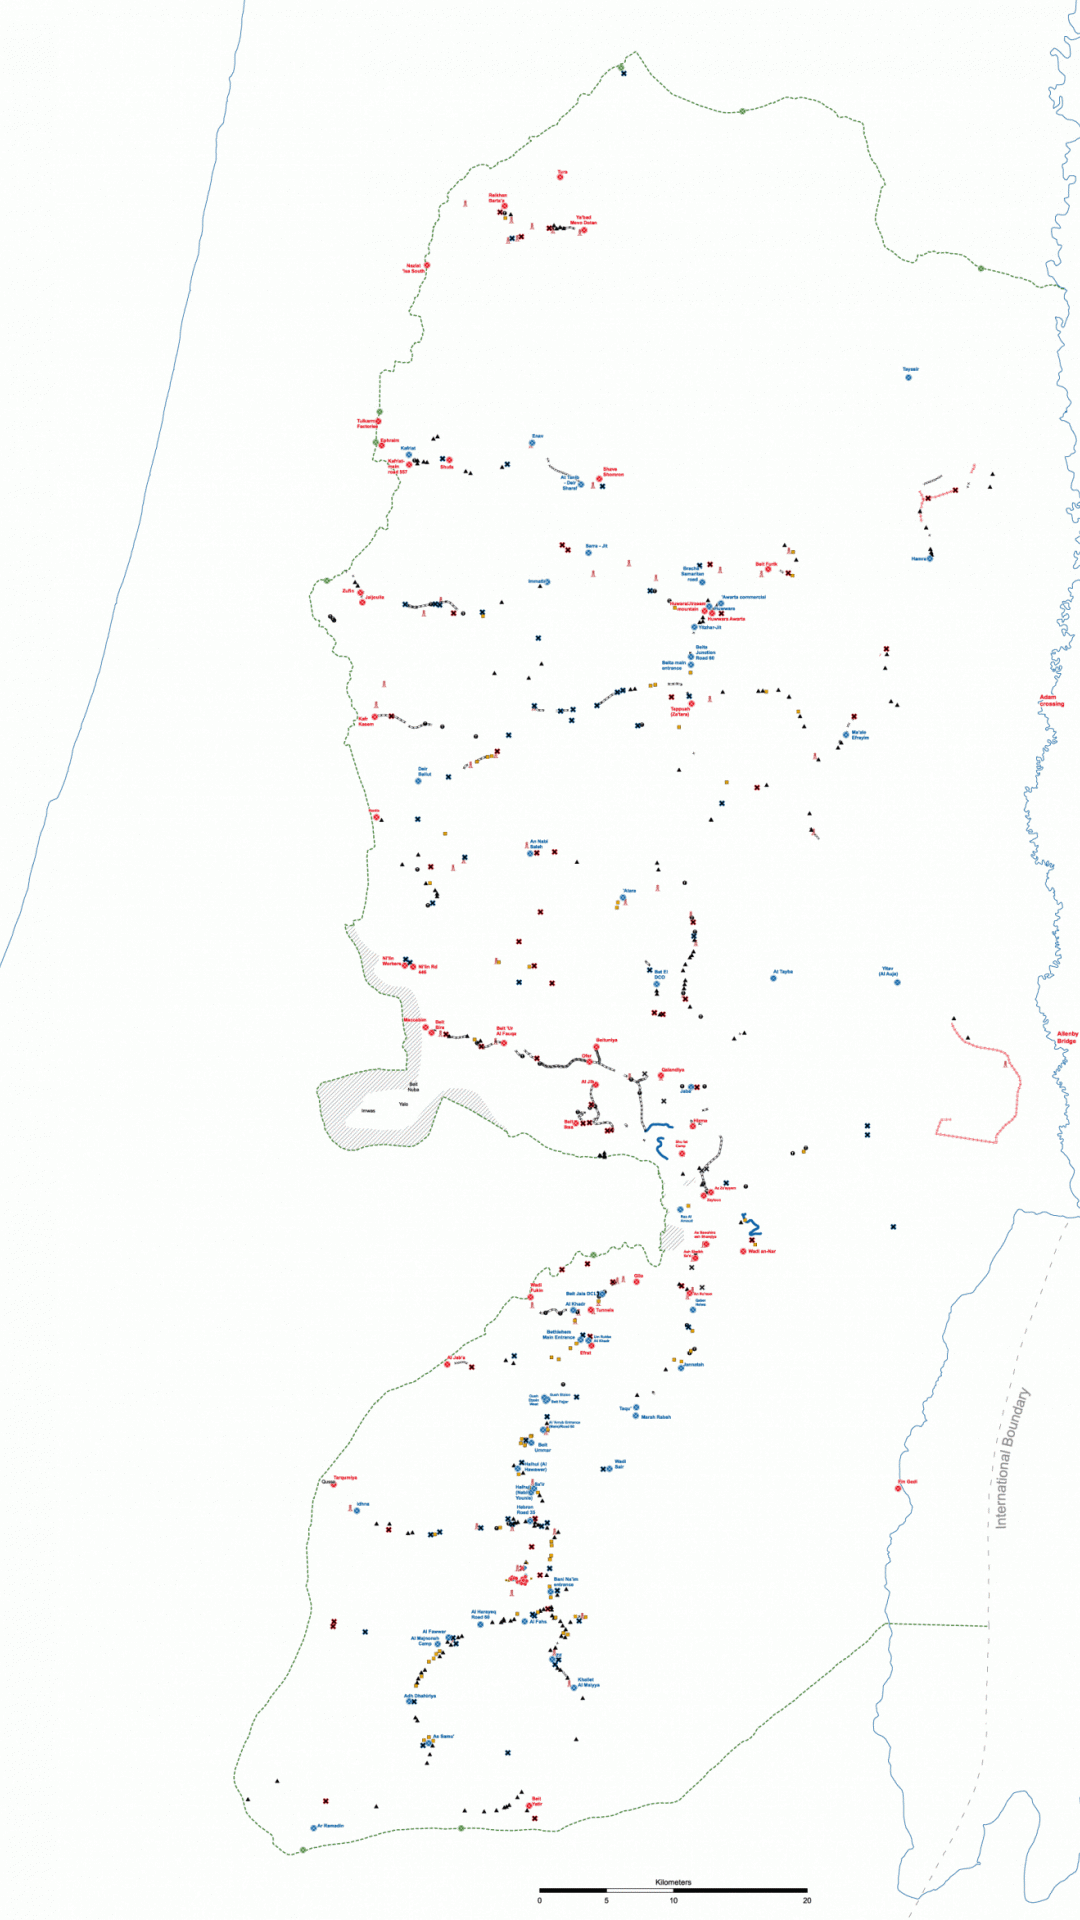 Closure distribution in the West Bank